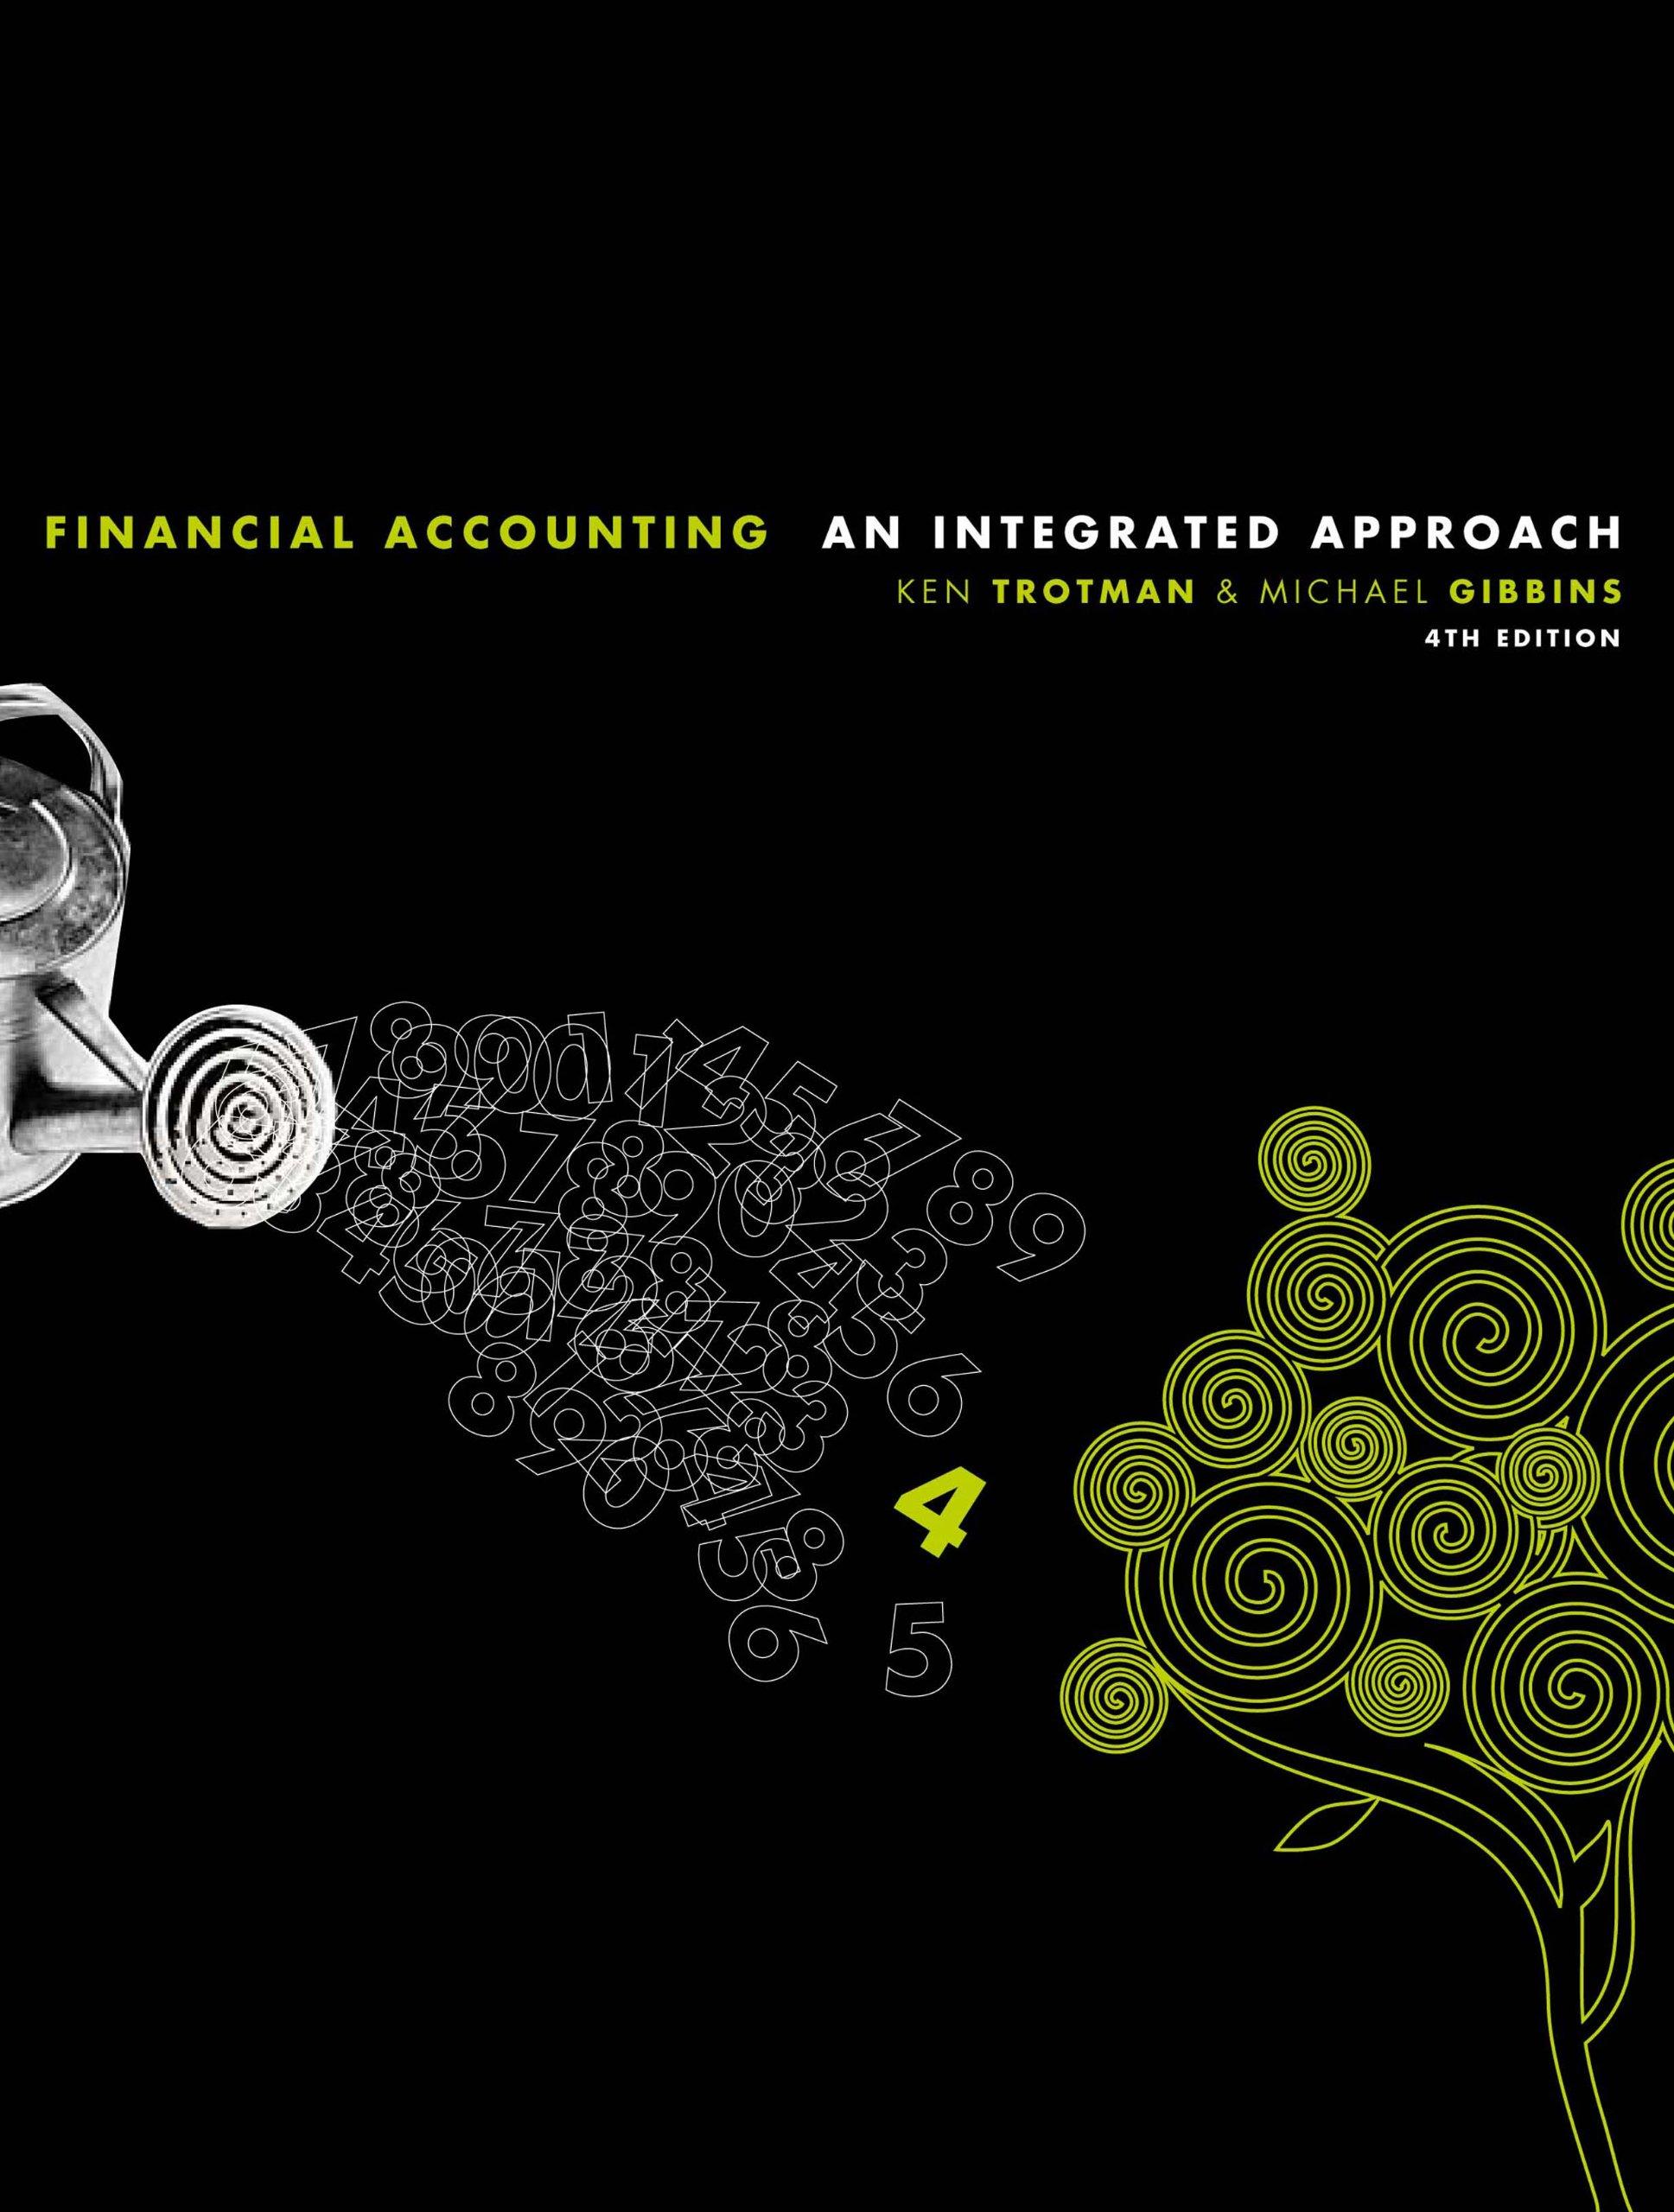 financial accounting an integrated approach 4th edition ken trotman, michael gibbins 0170178218, 9780170178211